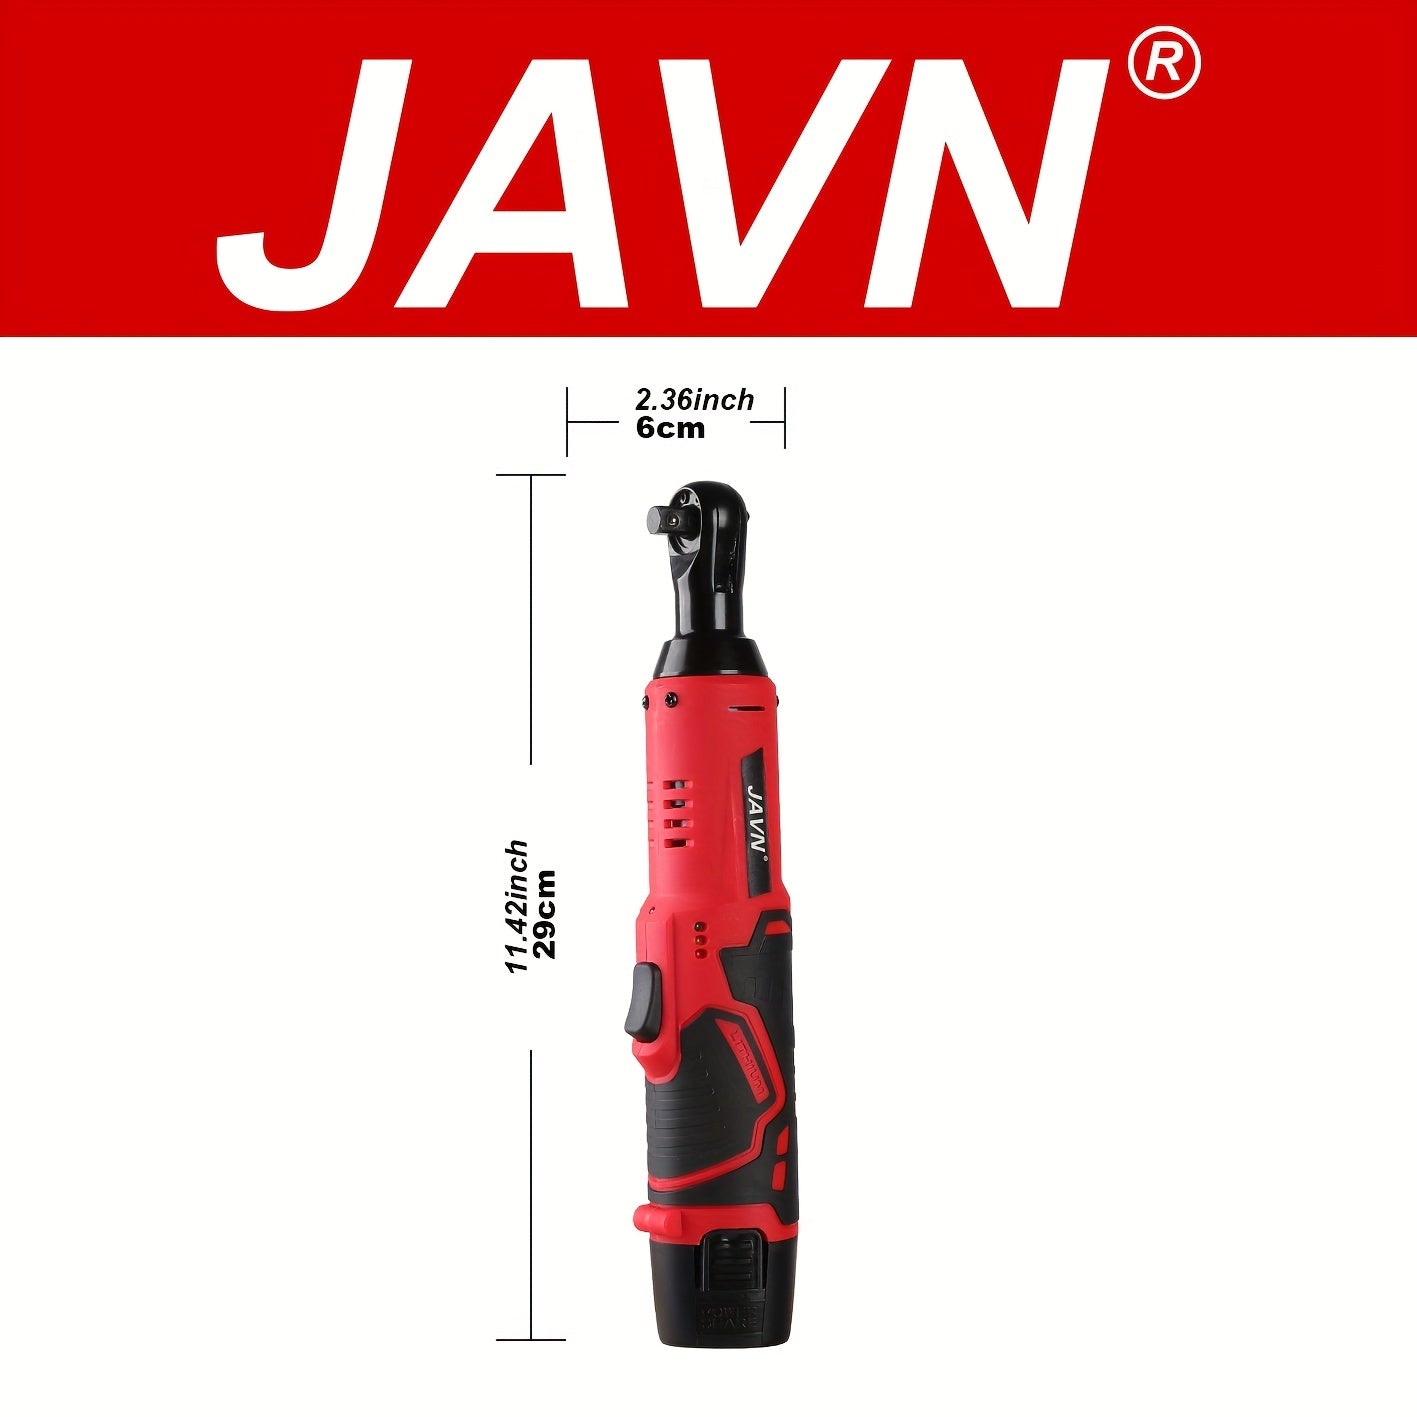 1 Set JAVN 12V Cordless Electric Wrench, 45NM 3\u002F8'' Ratchet Wrench, Removal Screw Nut Car Repair Tools, Right Angle Wrench, Power Tool